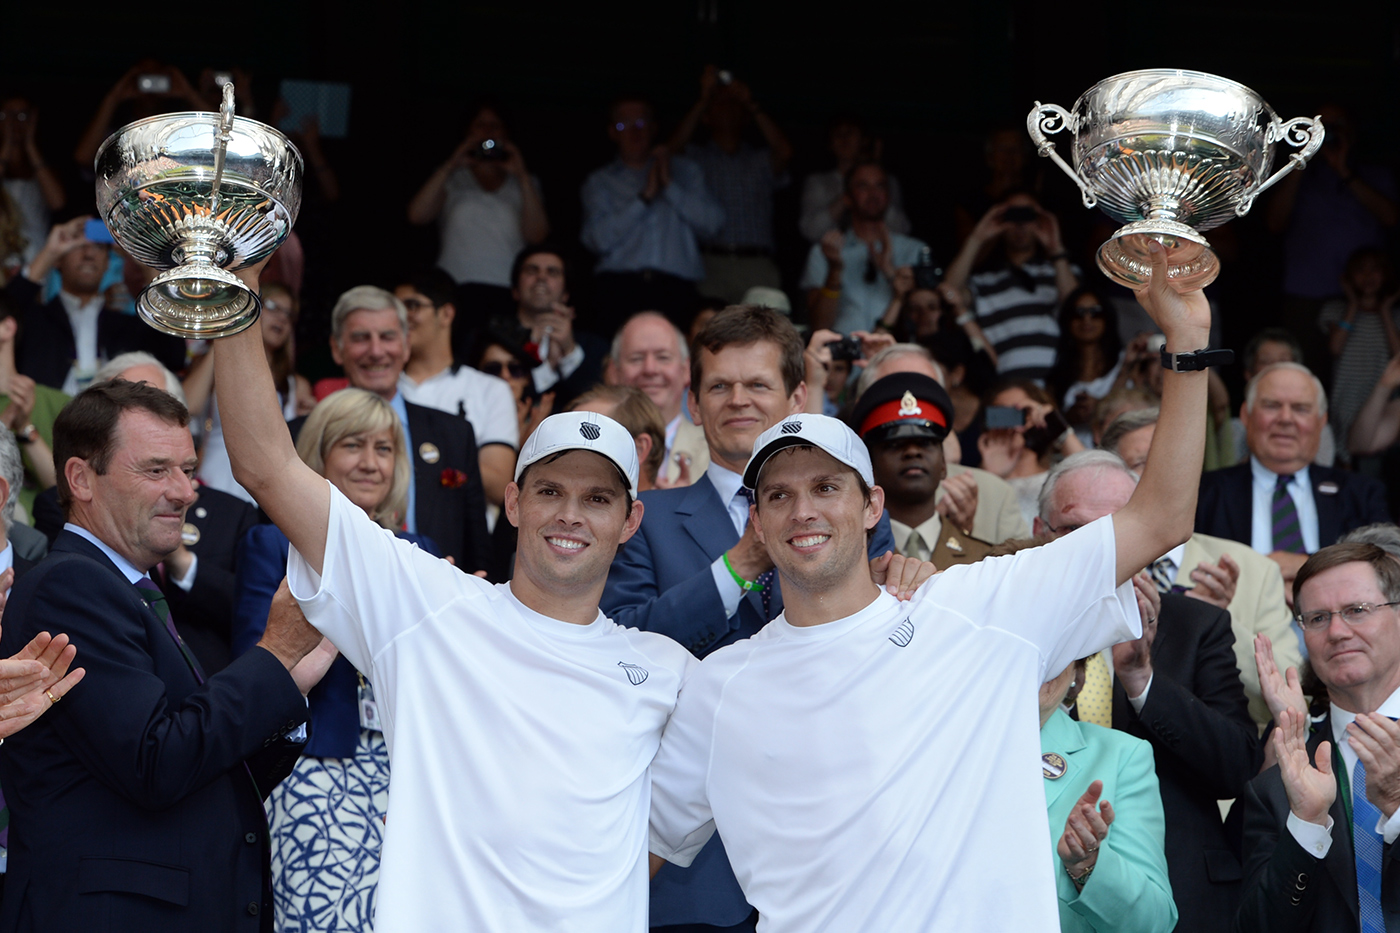 PLAYYOURCOURT PARTNERS WITH THE BRYAN BROTHERS